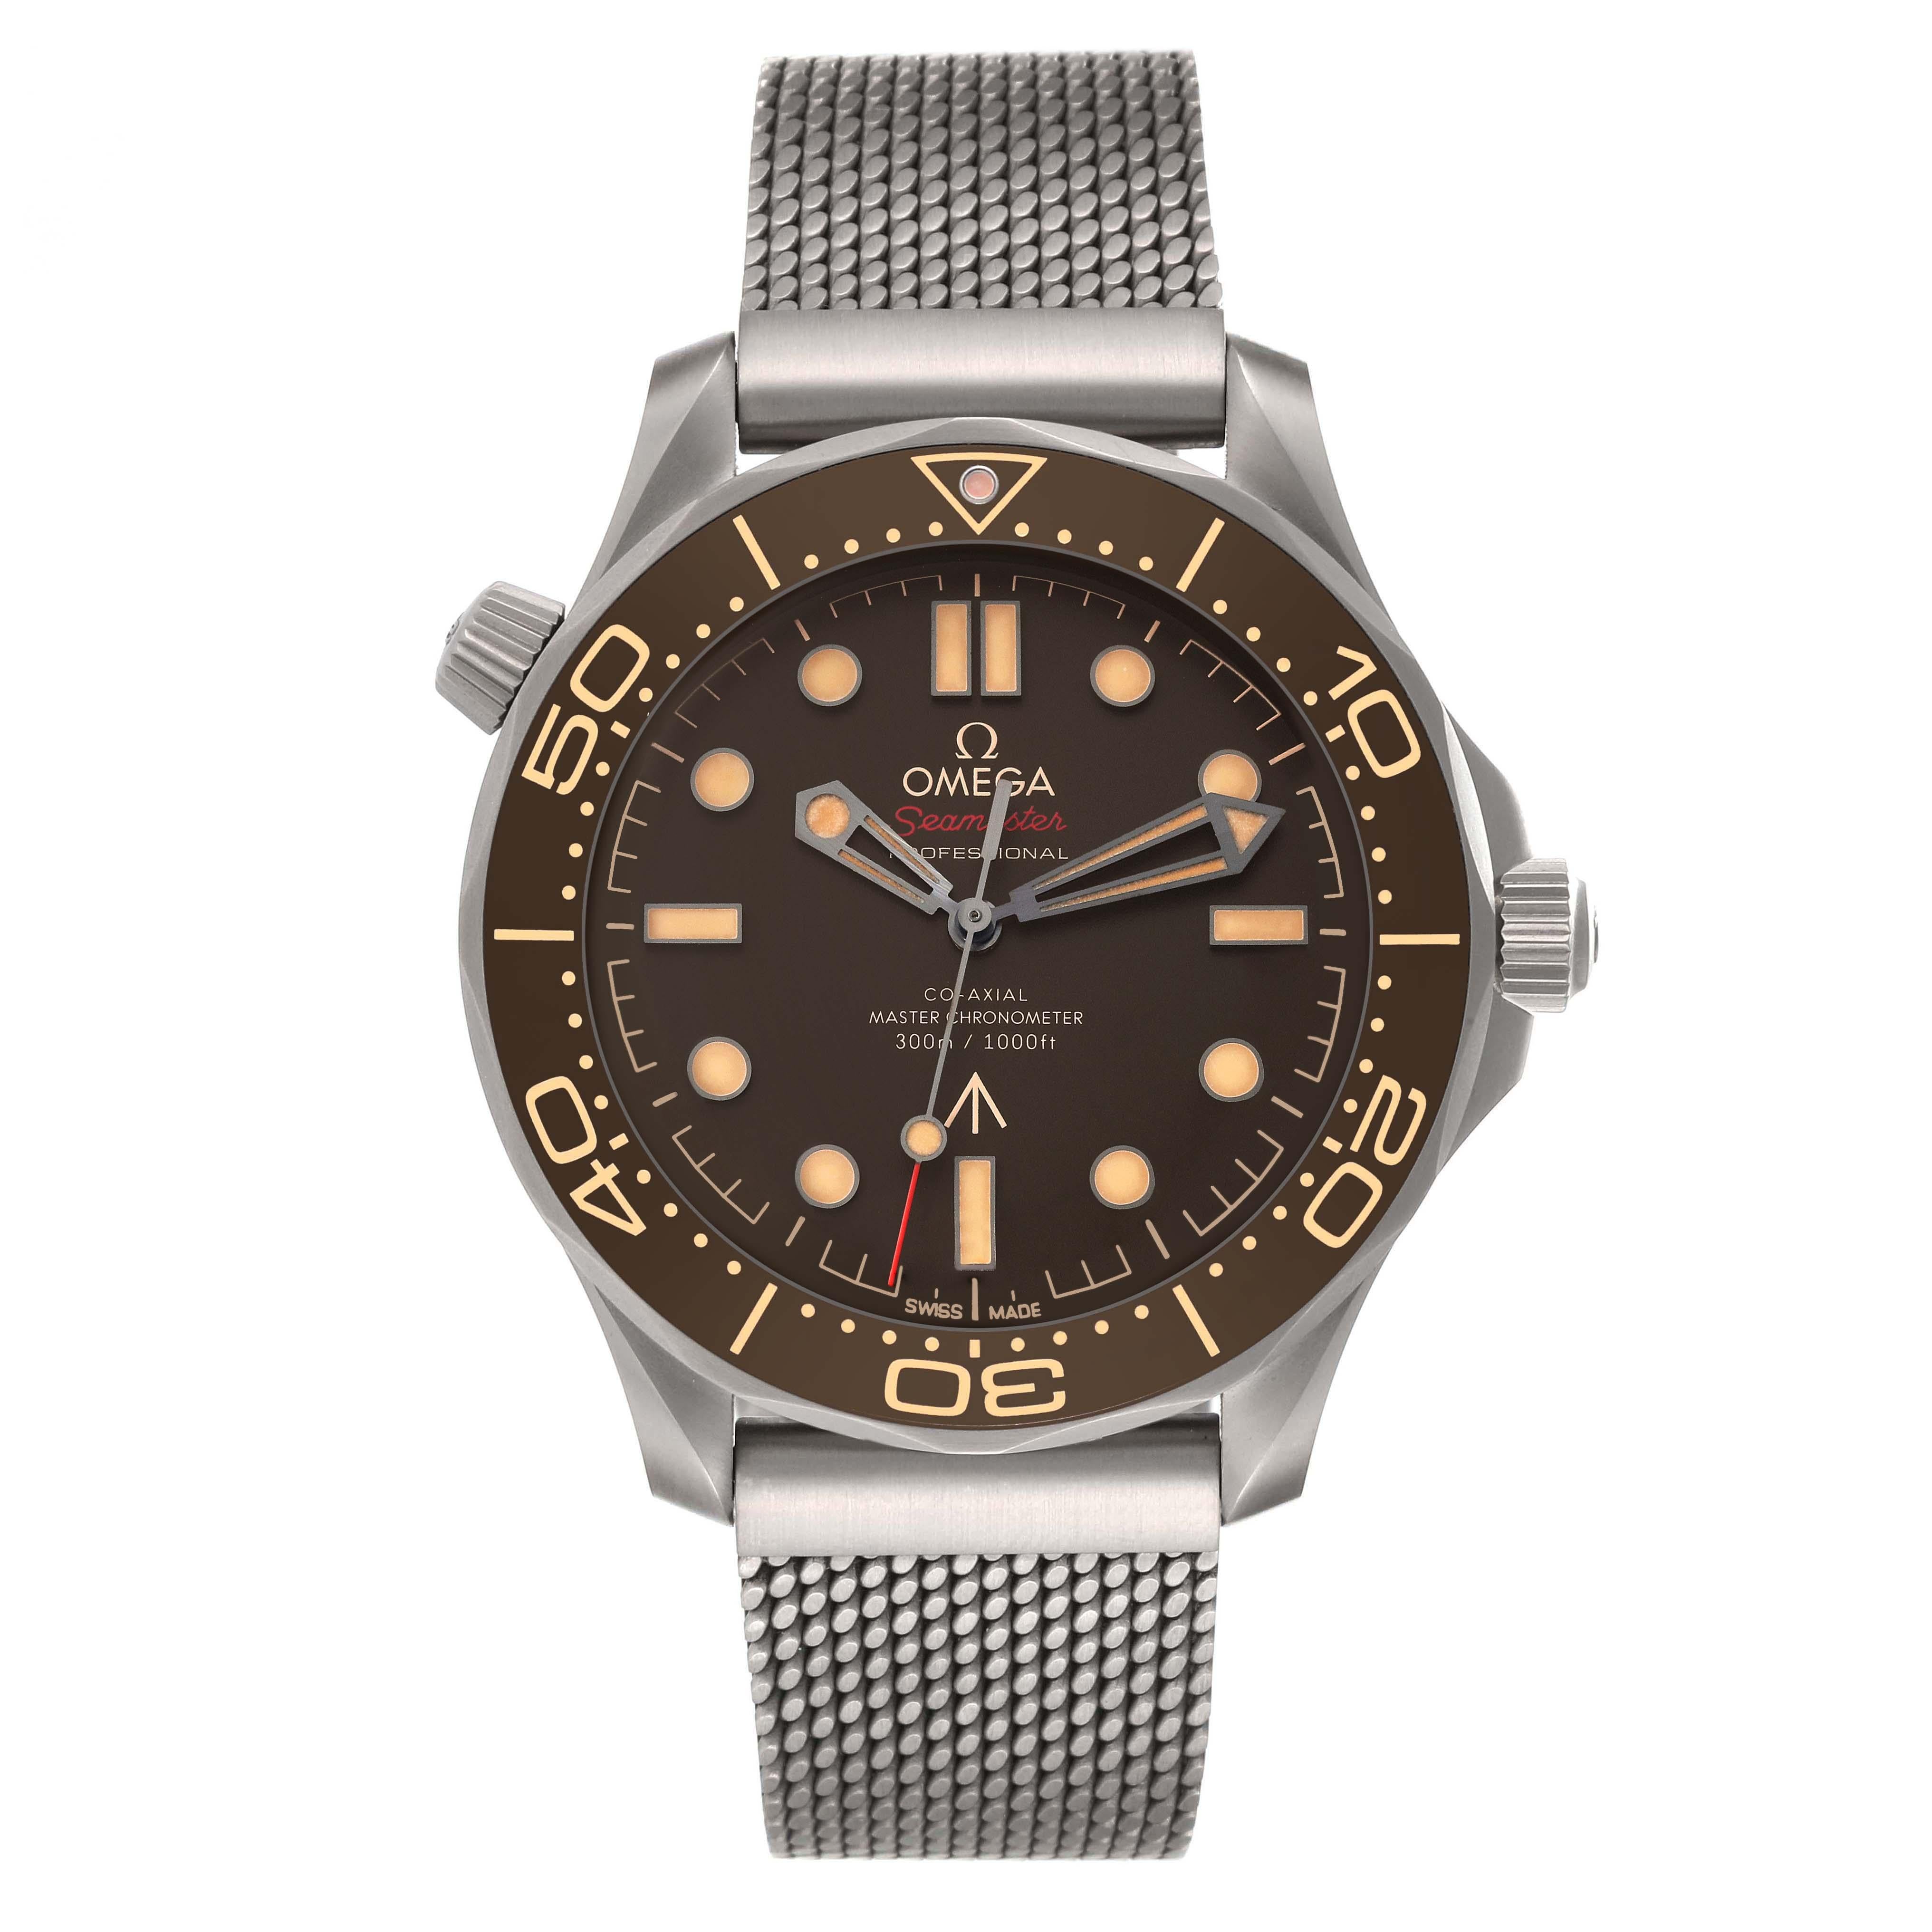 Omega Seamaster 007 Edition Titanium Mens Watch 210.90.42.20.01.001 Box Card. Automatic self-winding movement. Titanium round case 42.0 mm in diameter. Brown unidirectional rotating bezel. Scratch resistant sapphire crystal. Matte tropical brown